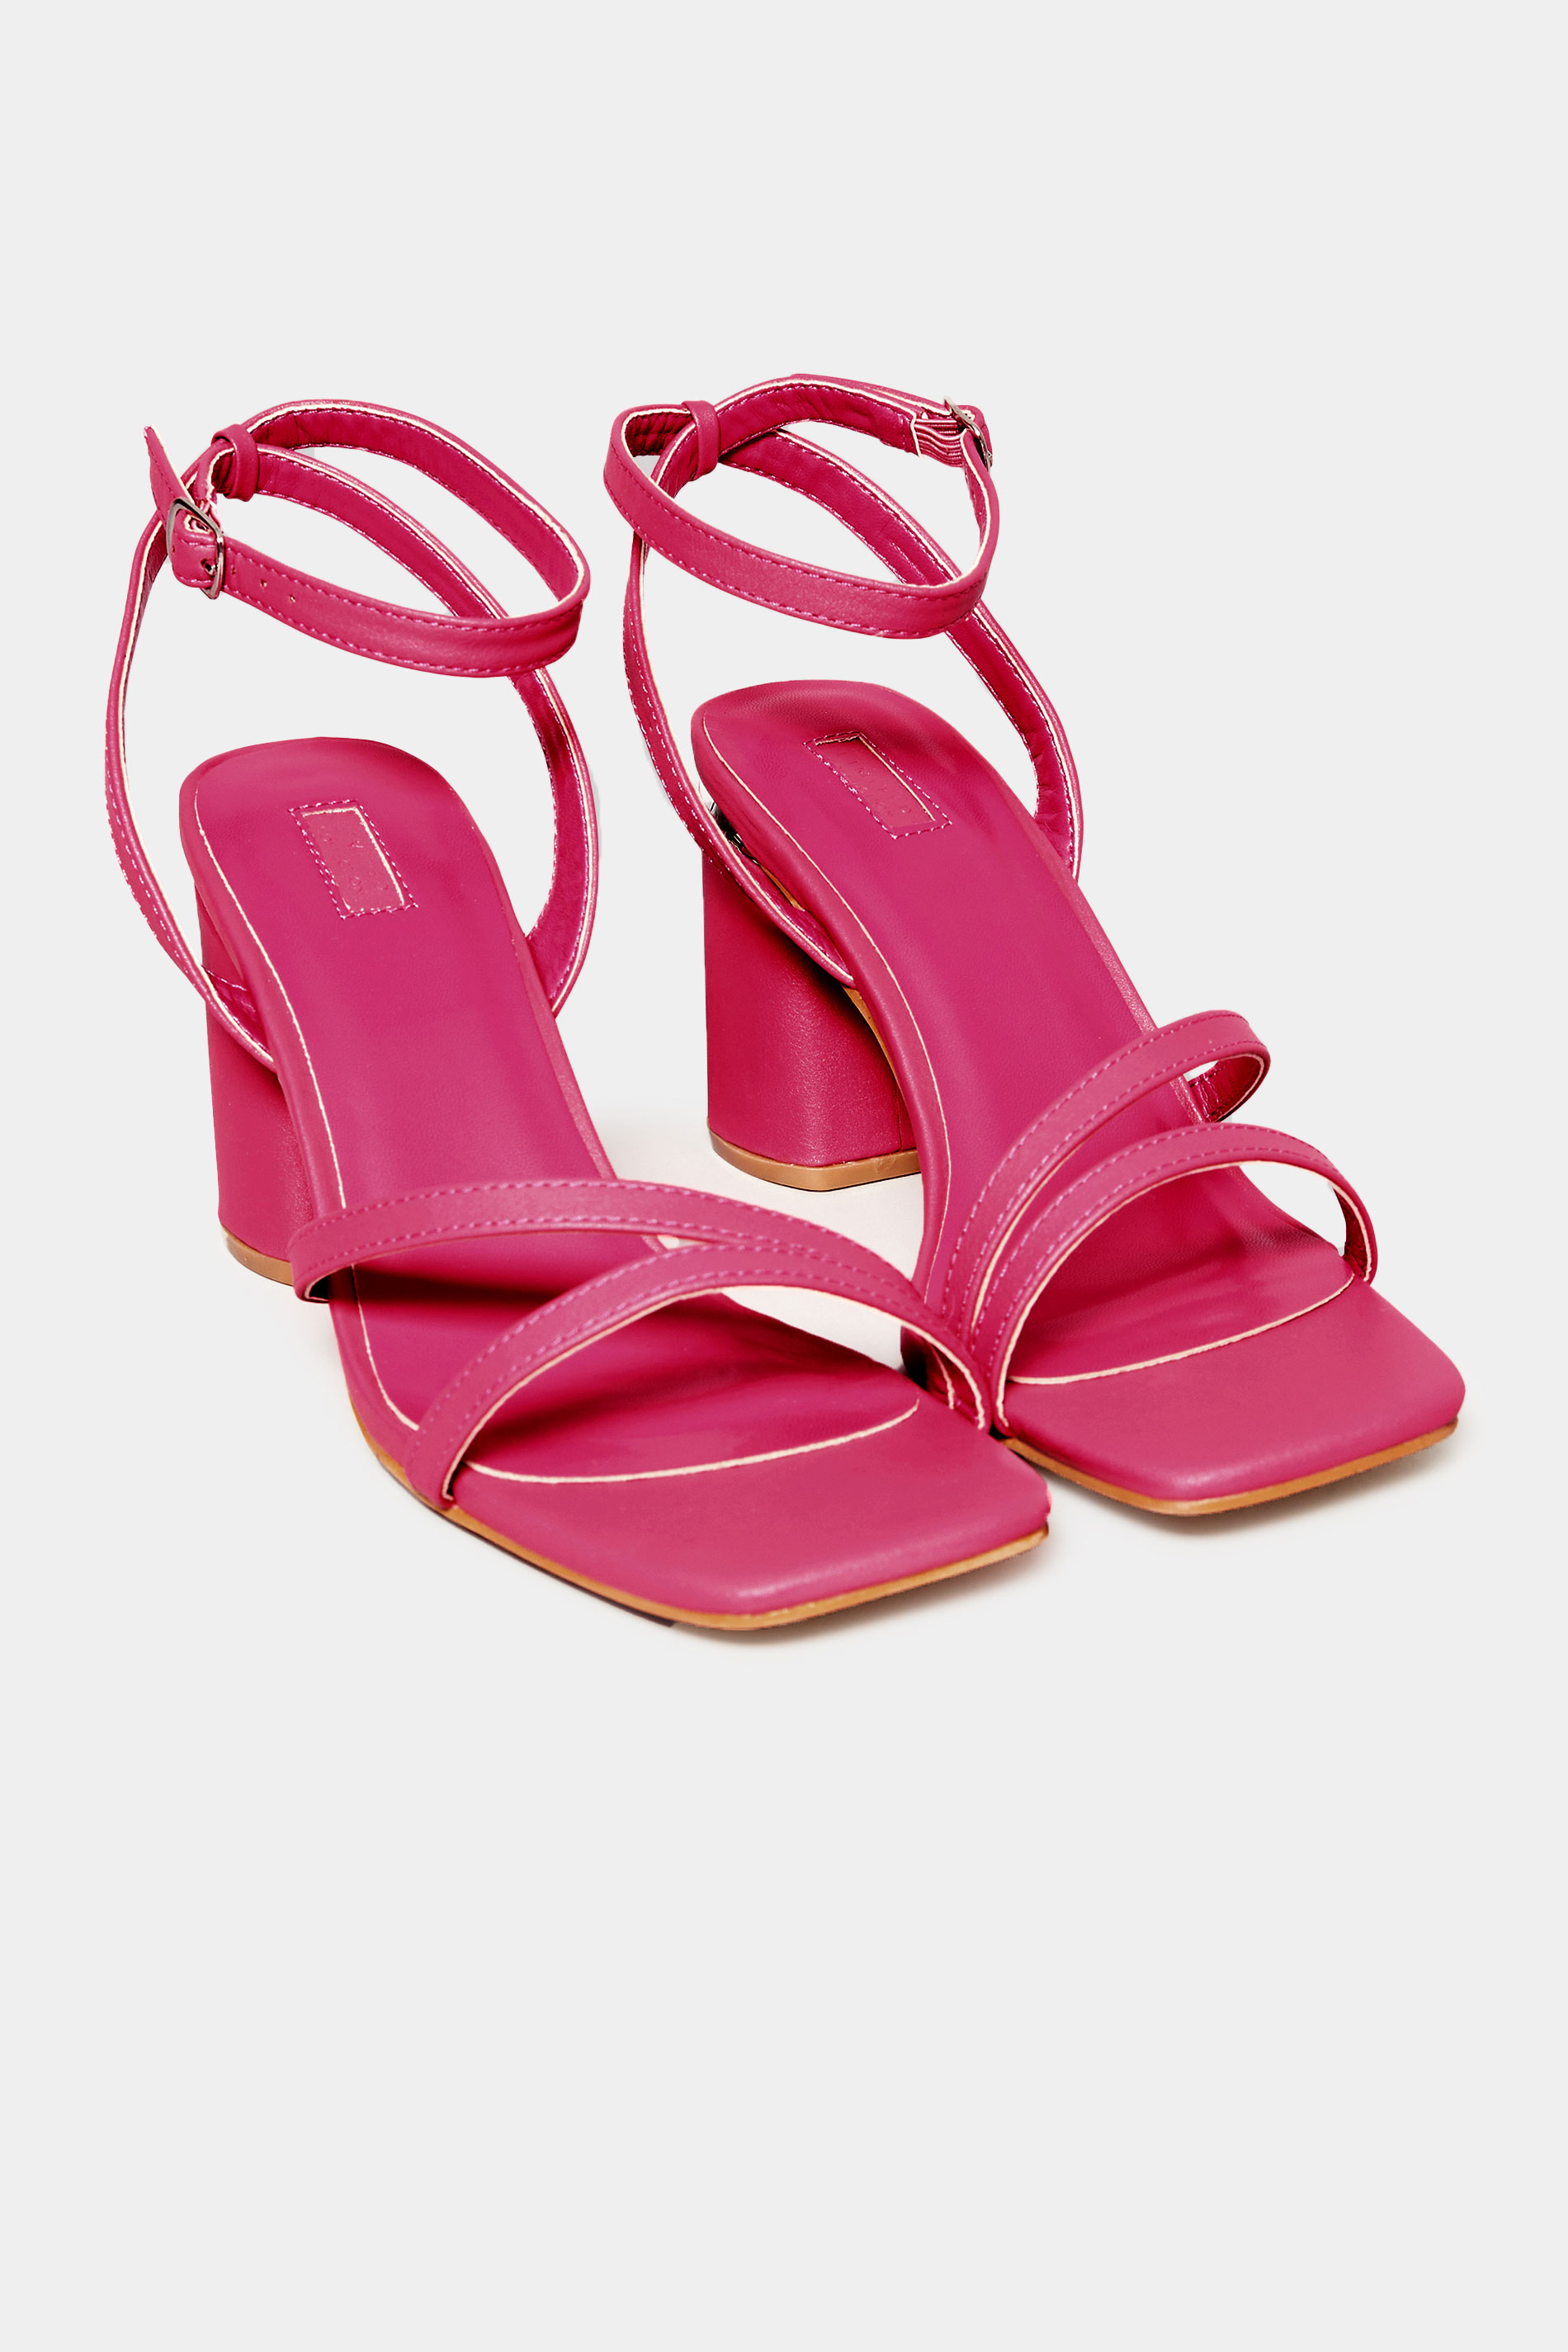 LIMITED COLLECTION Hot Pink Asymmetrical Block Heel Sandal In Wide E Fit & Extra Fit EEE Fit 1